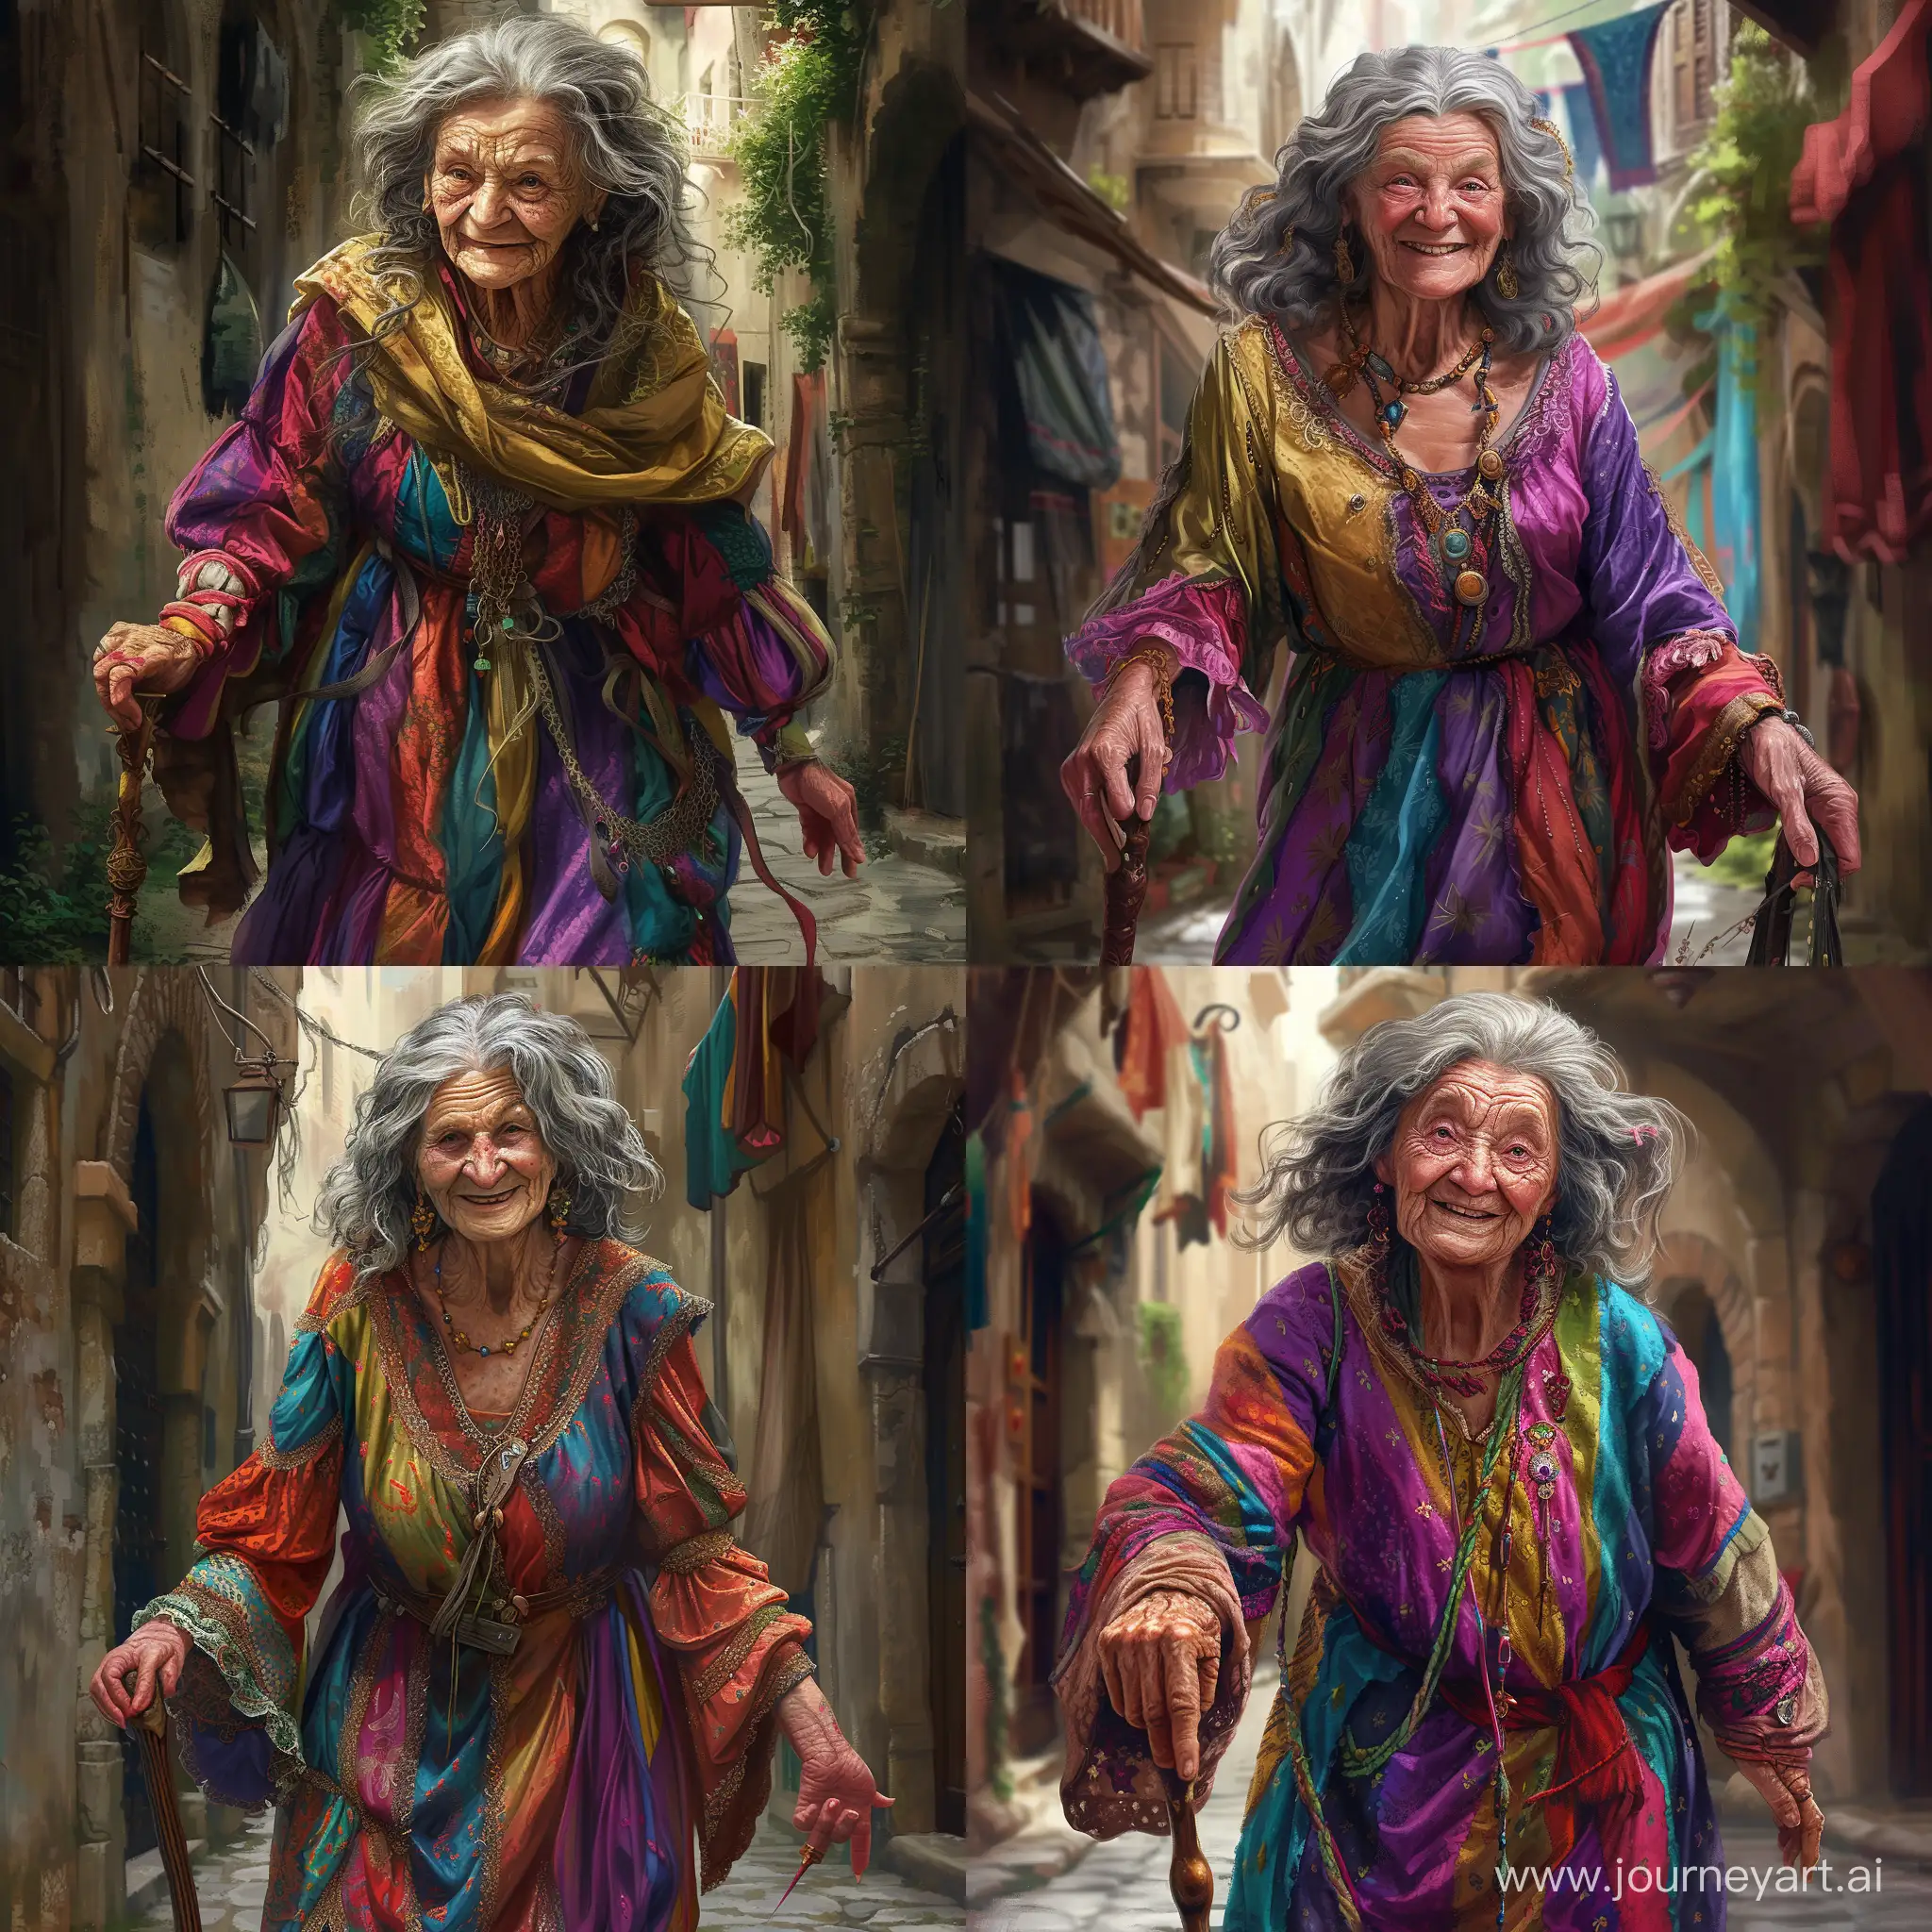 Draw a character from the Dungeons and Dragons universe according to the following description: She is an elderly human woman dressed in colorful gypsy clothes. She has wavy gray hair on her head and a soft joyful smile. Her old wrinkly face radiates wisdom and kindness. 
She has a walking staff in her hand, as she makes way through an alleyway.